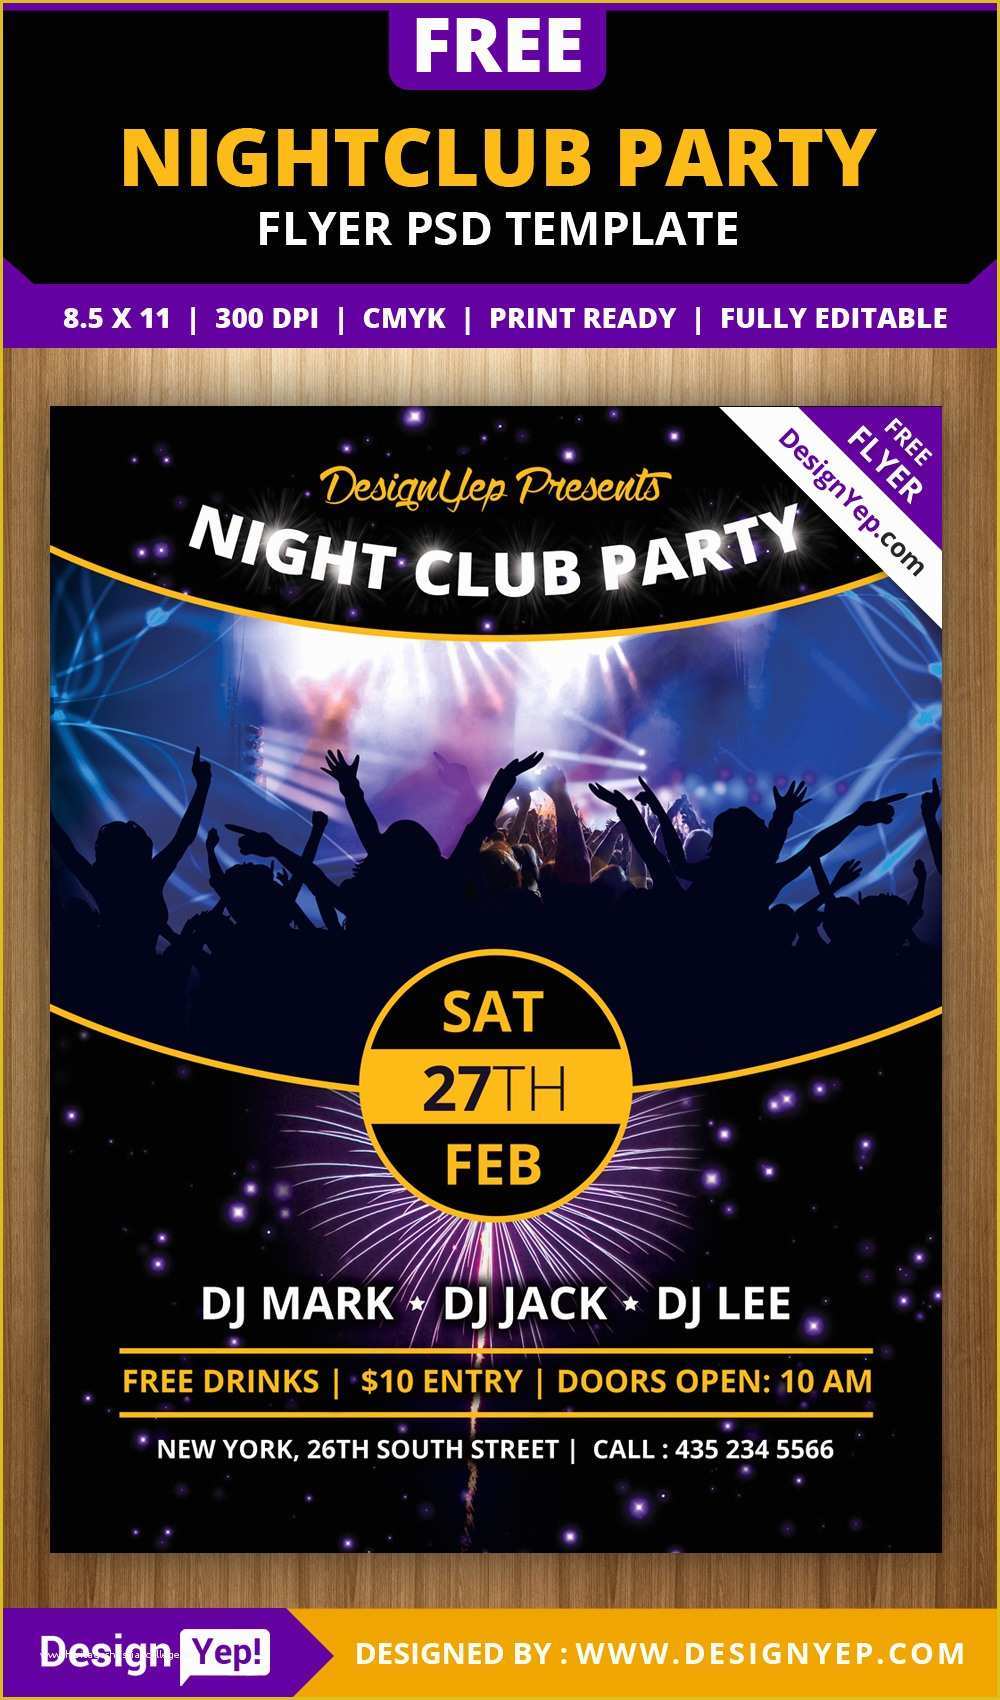 Party Flyer Template Free Of Free Nightclub Party Flyer Psd Template Designyep